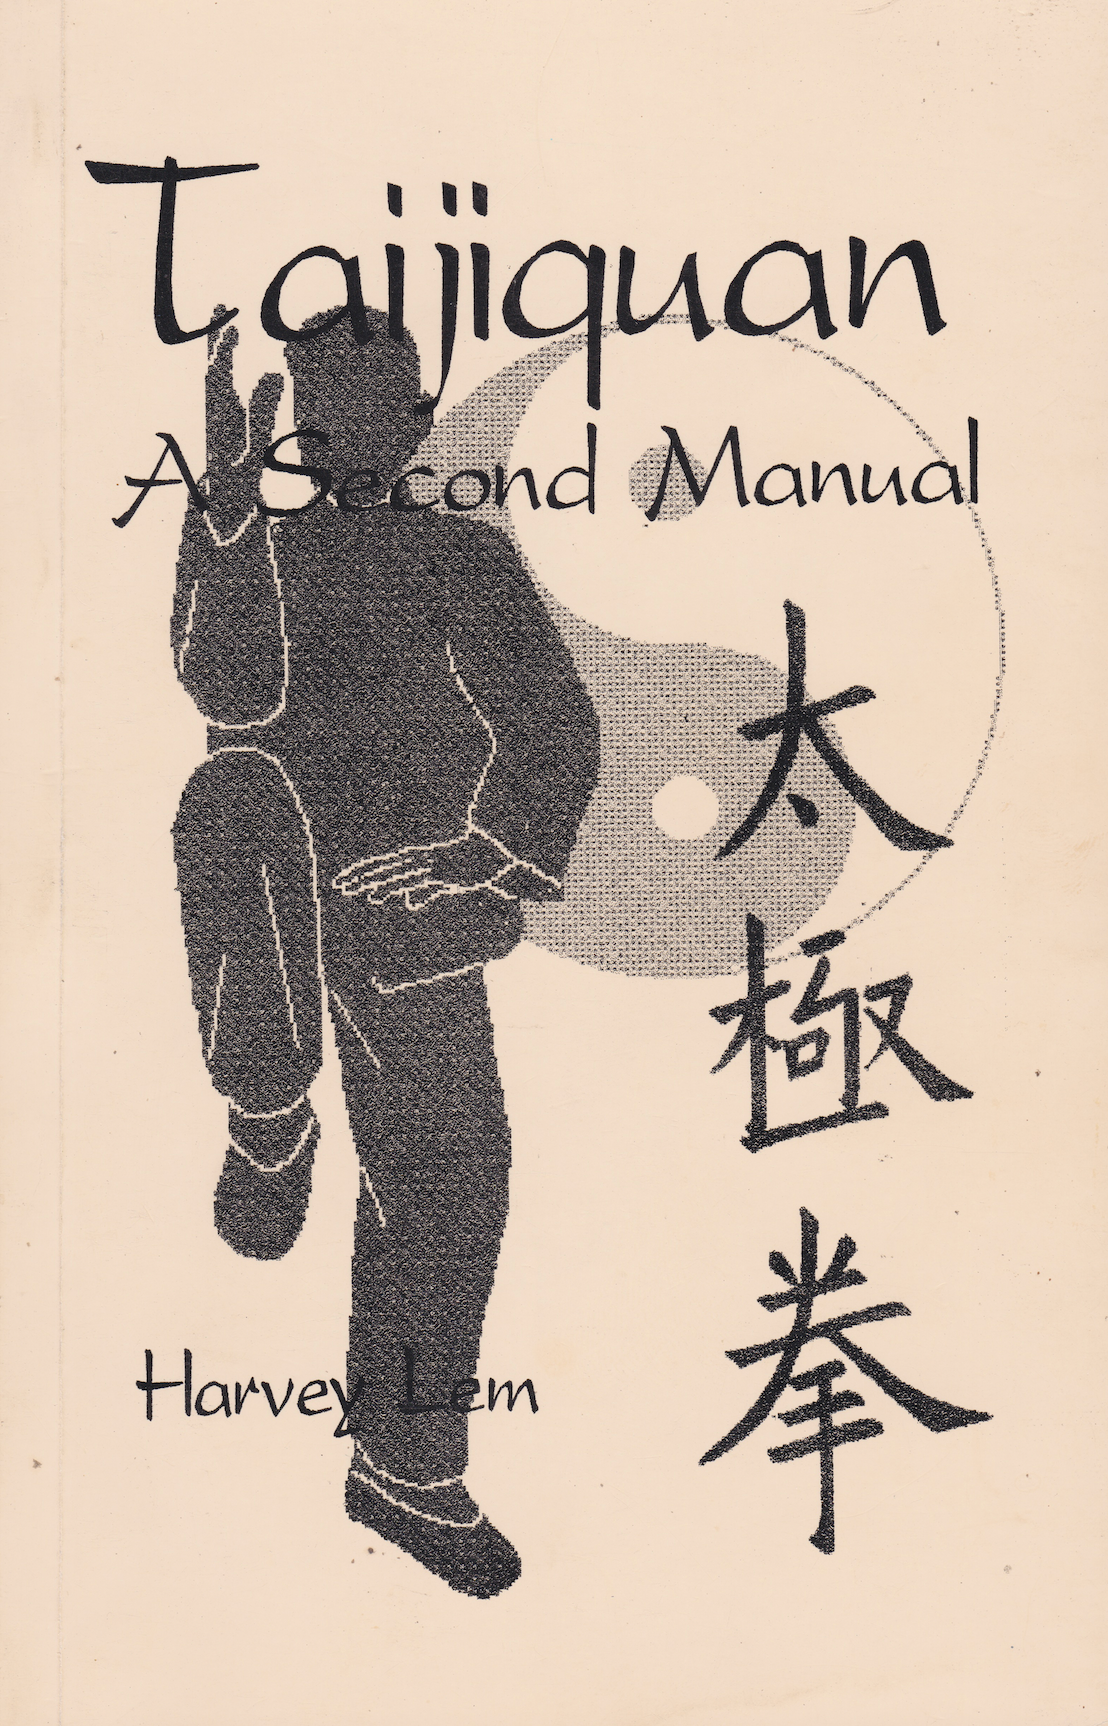 Taijiquan: A Second Manual Book by Harvey Lem (Signed) (Preowned) - Budovideos Inc